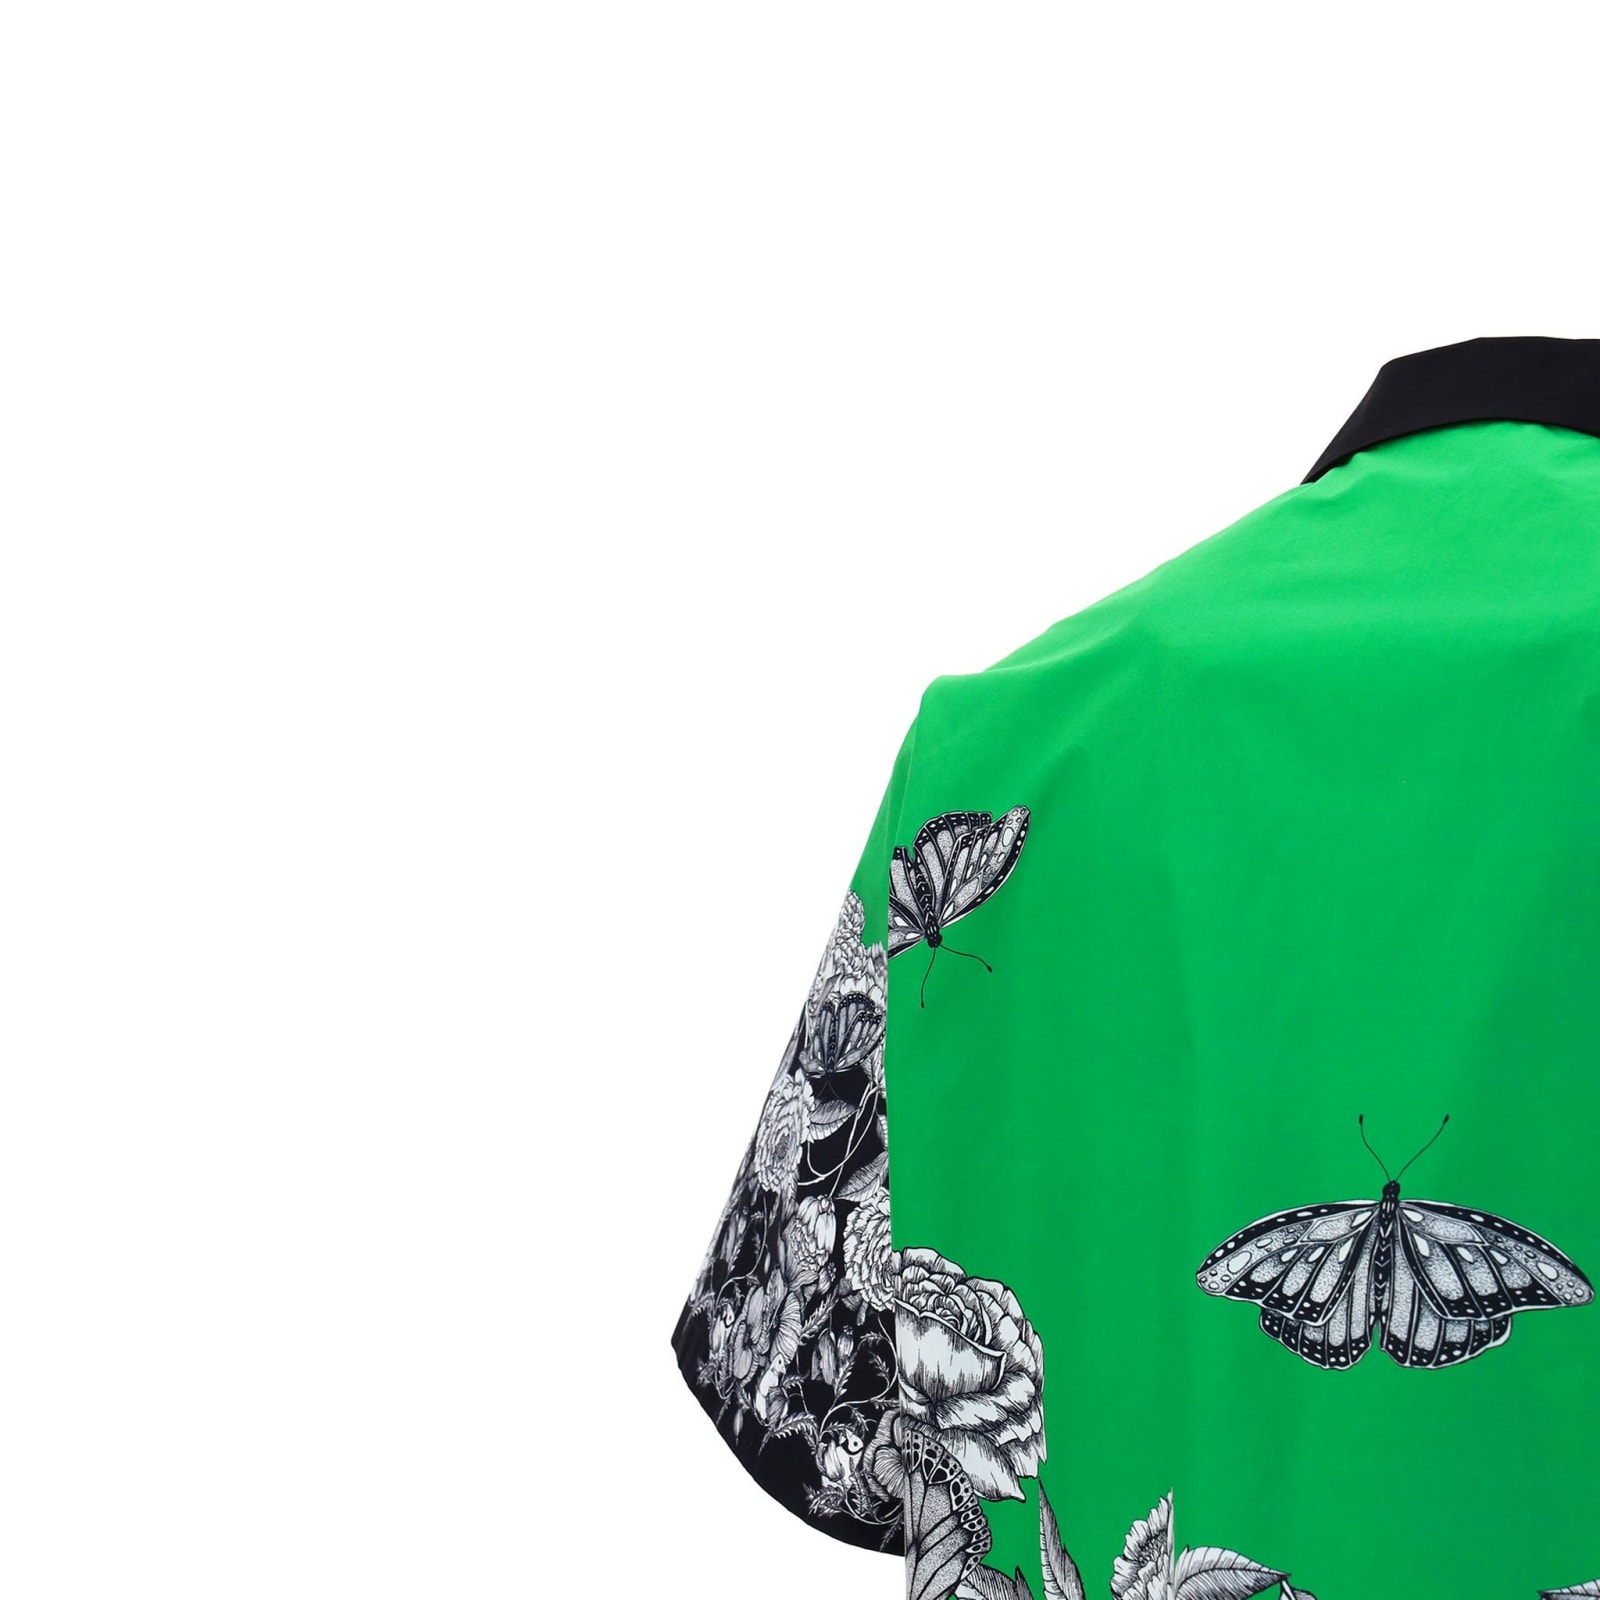 Shop Valentino Floral Printed Shirt In Green